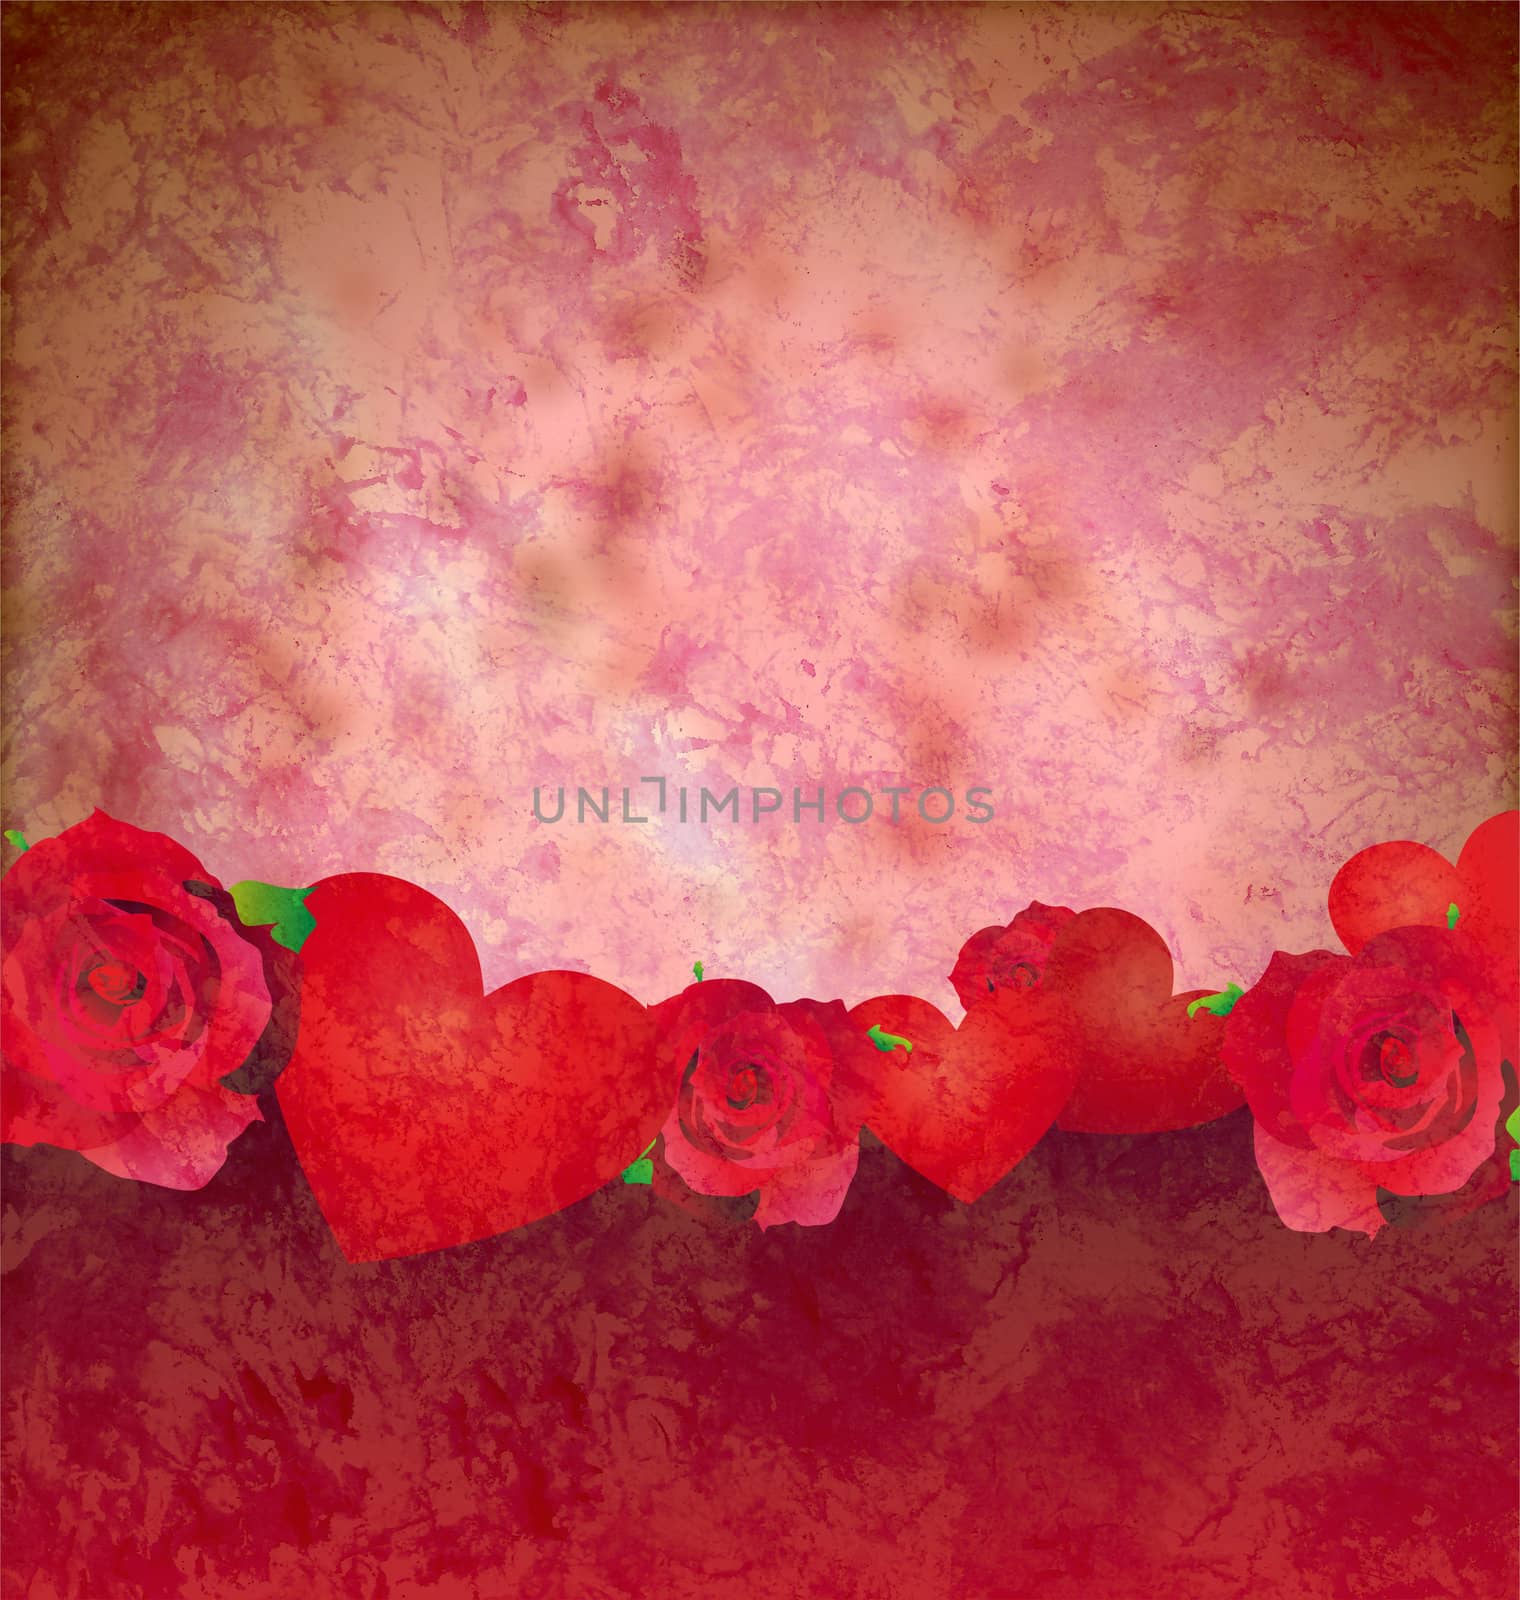 grunge red hearts and roses border red background lovely background